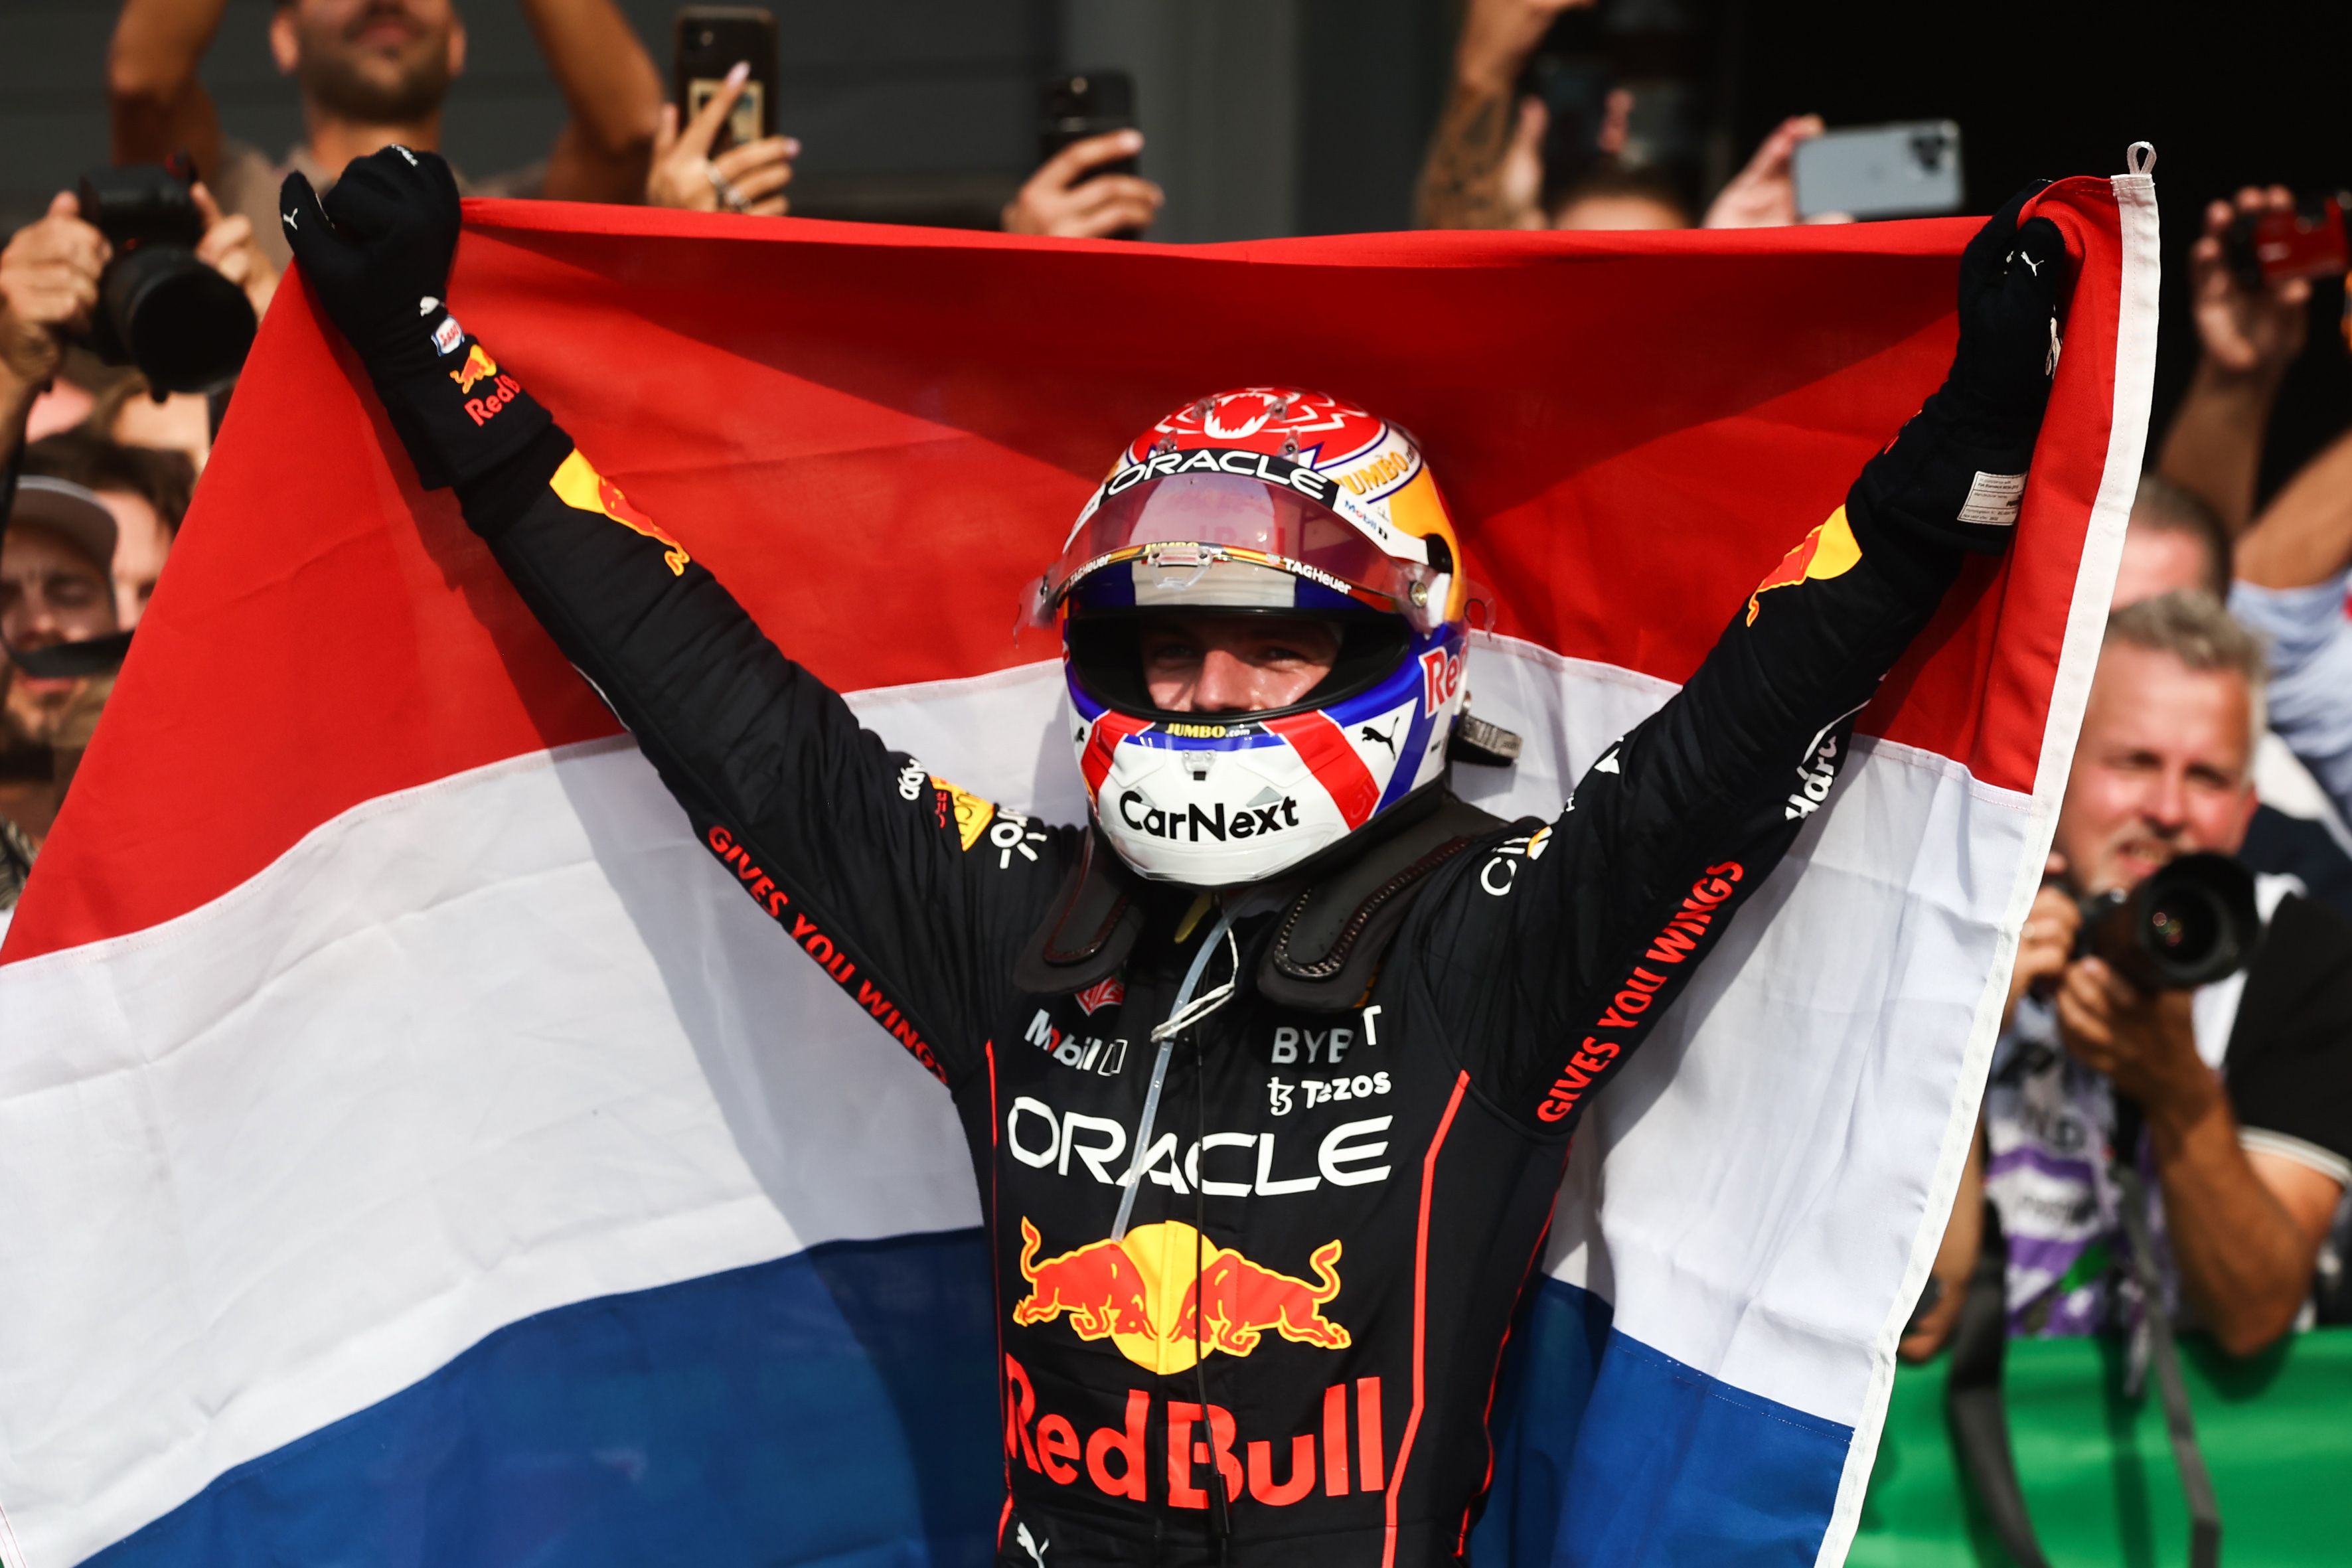 Max Verstappen bids for record-breaking 10th straight F1 win at Monza